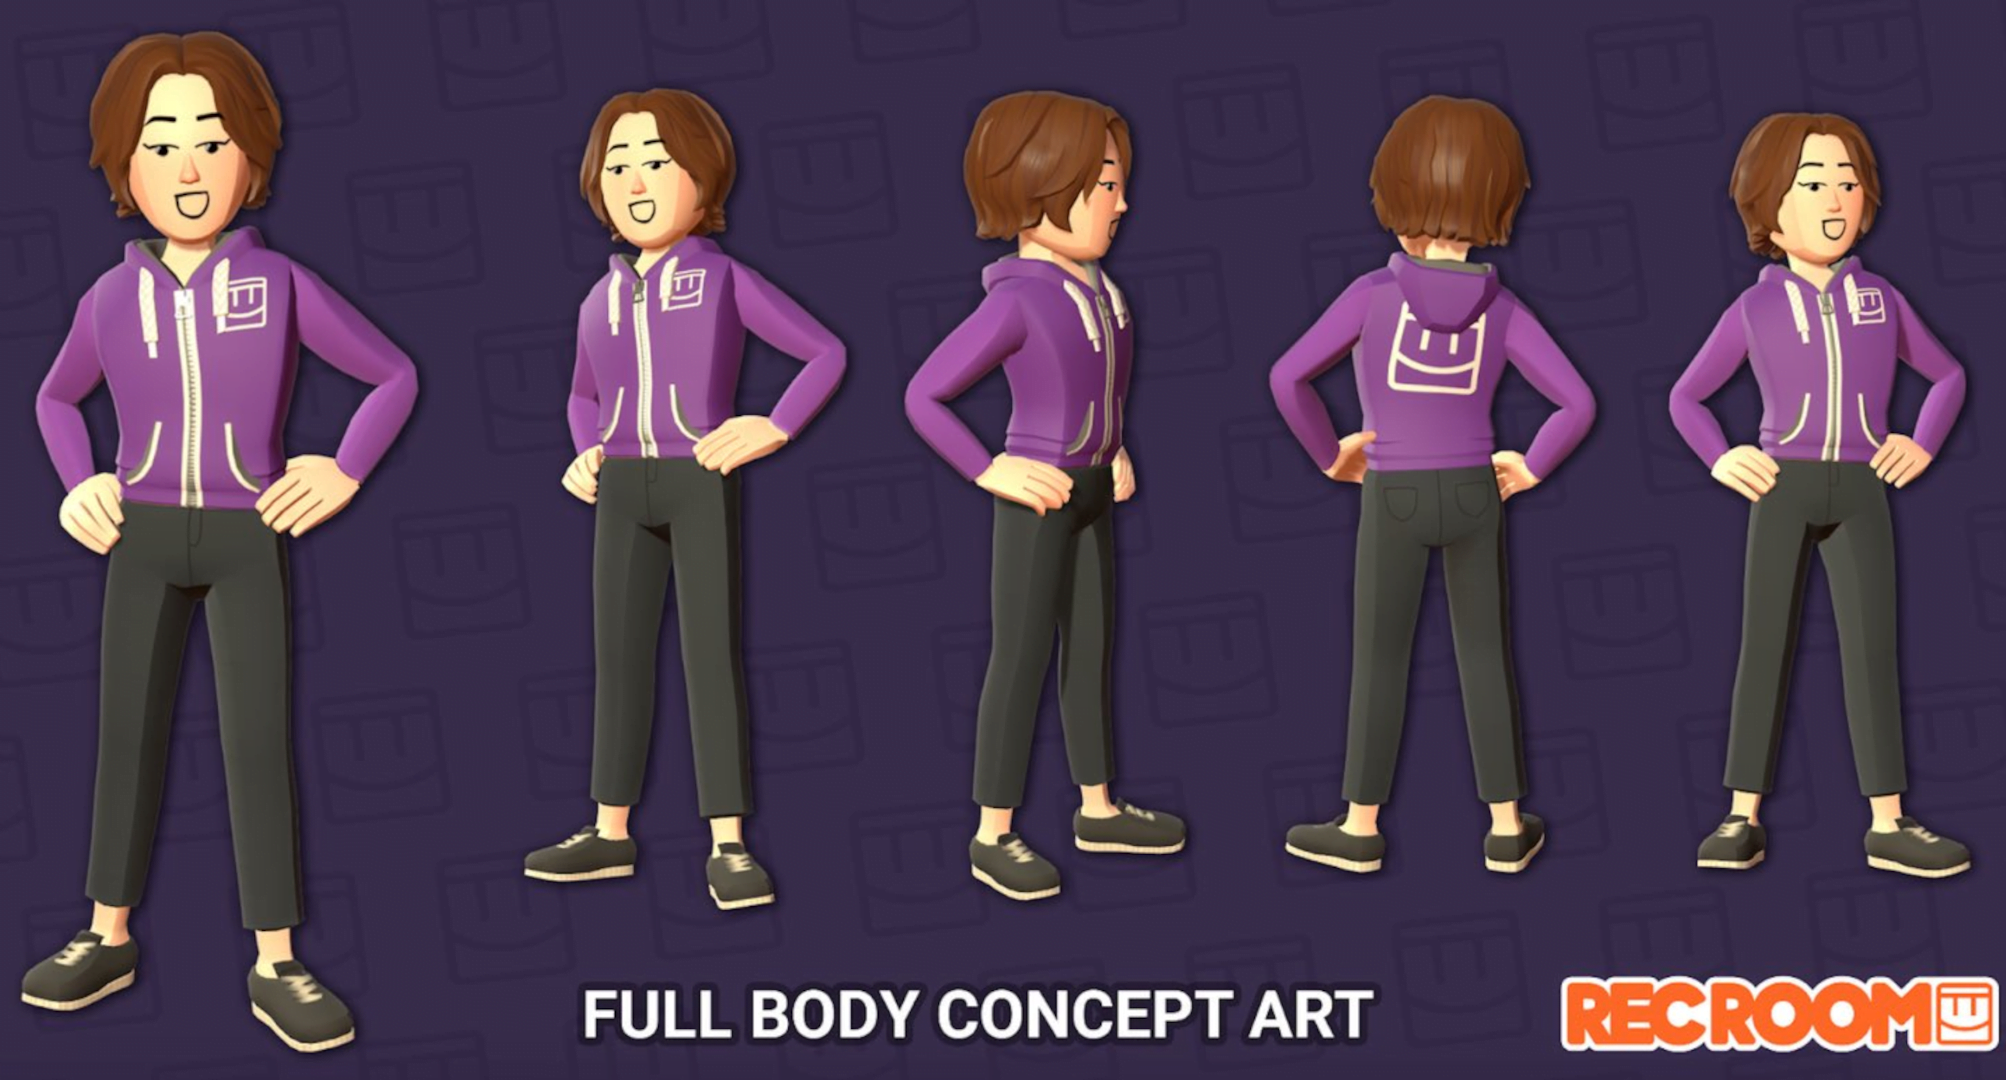 Rec Room works on full body avatars with arms and legs